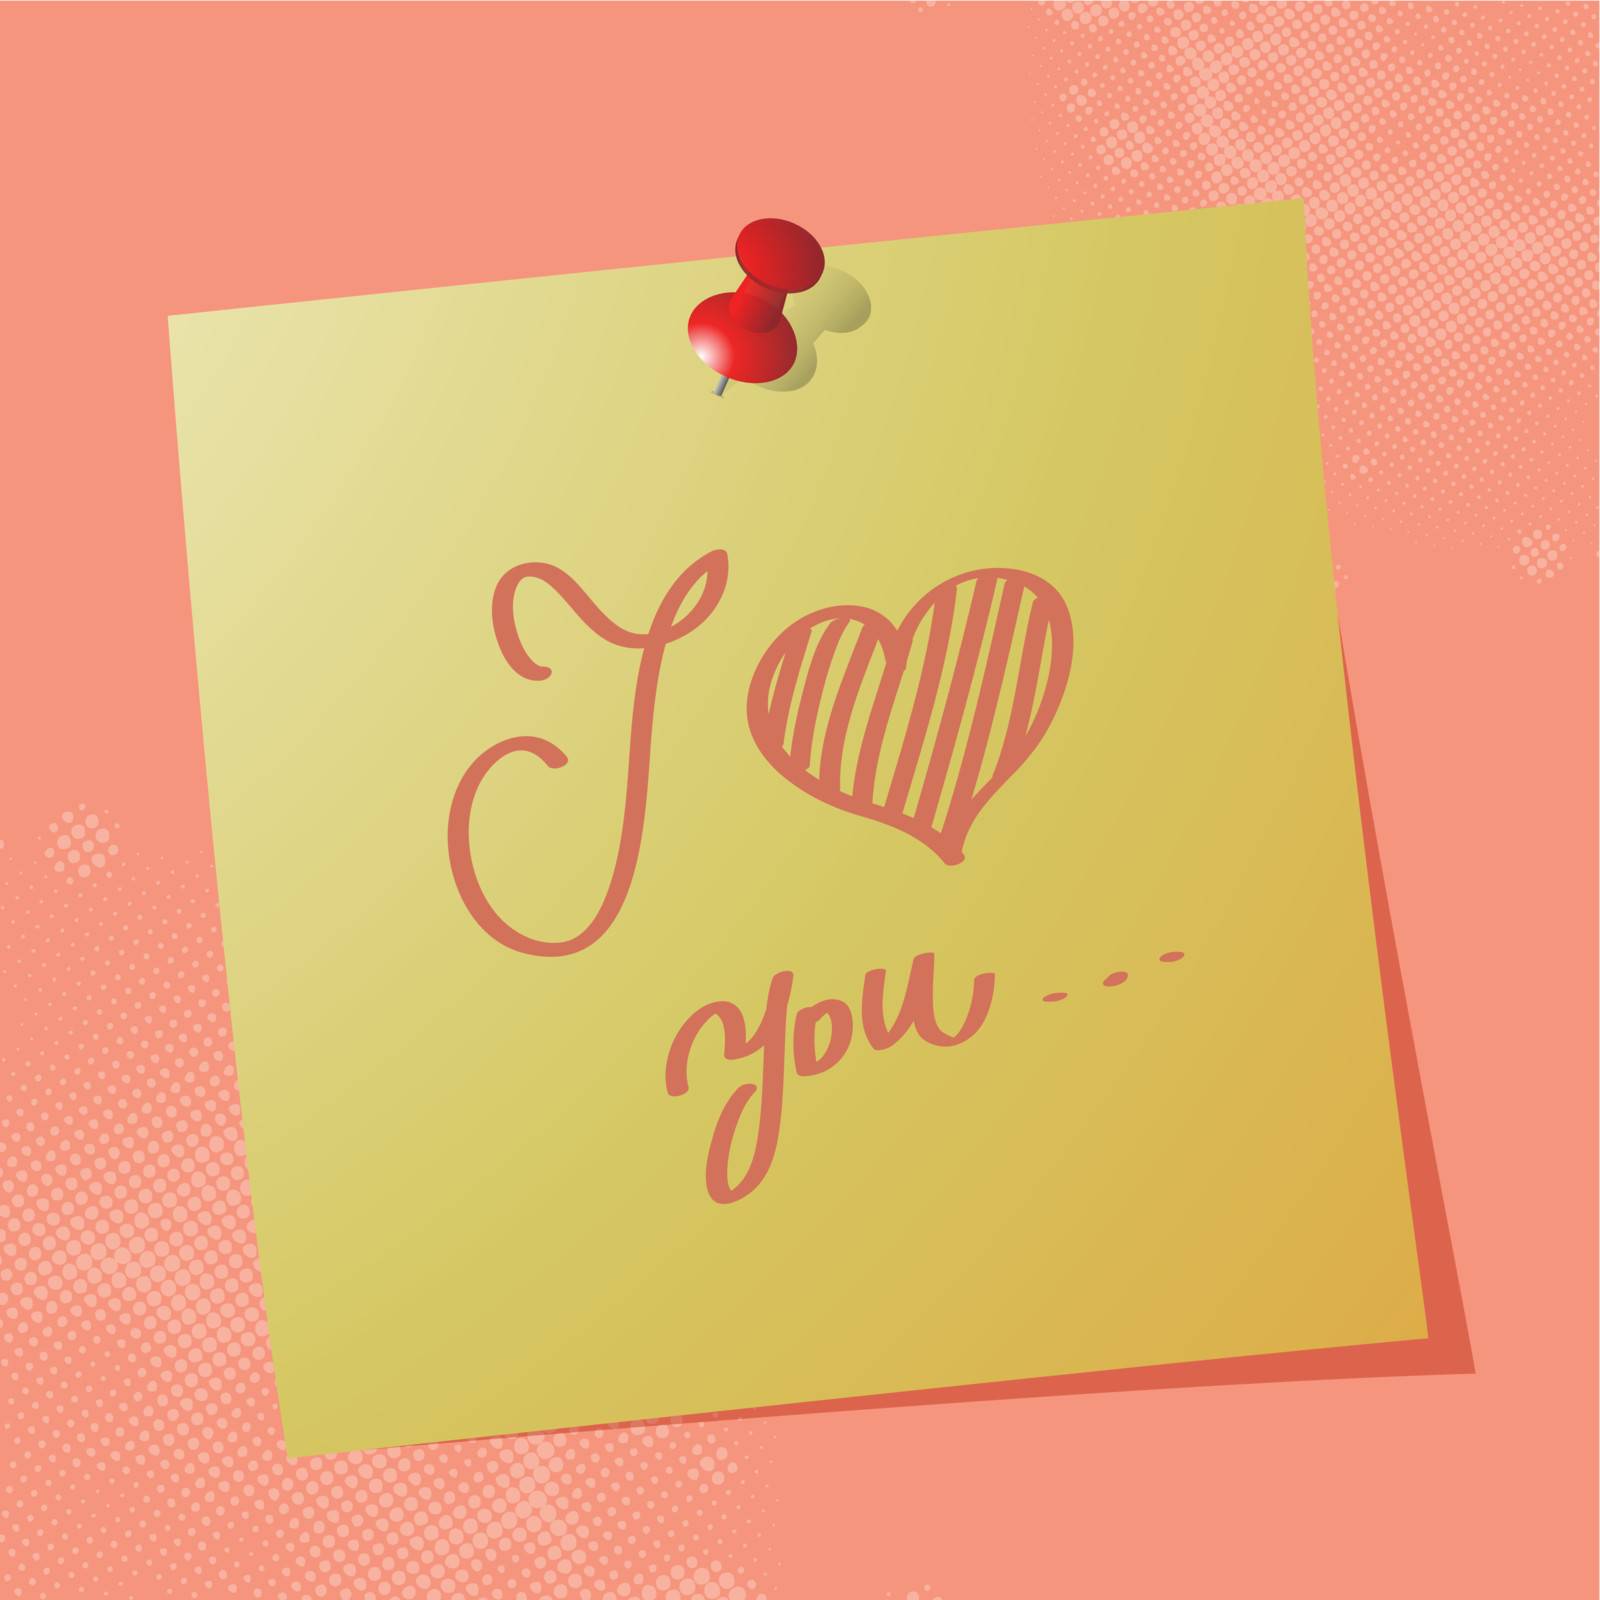 "I love you" handwritten message on sticky paper, eps10 vector illustration